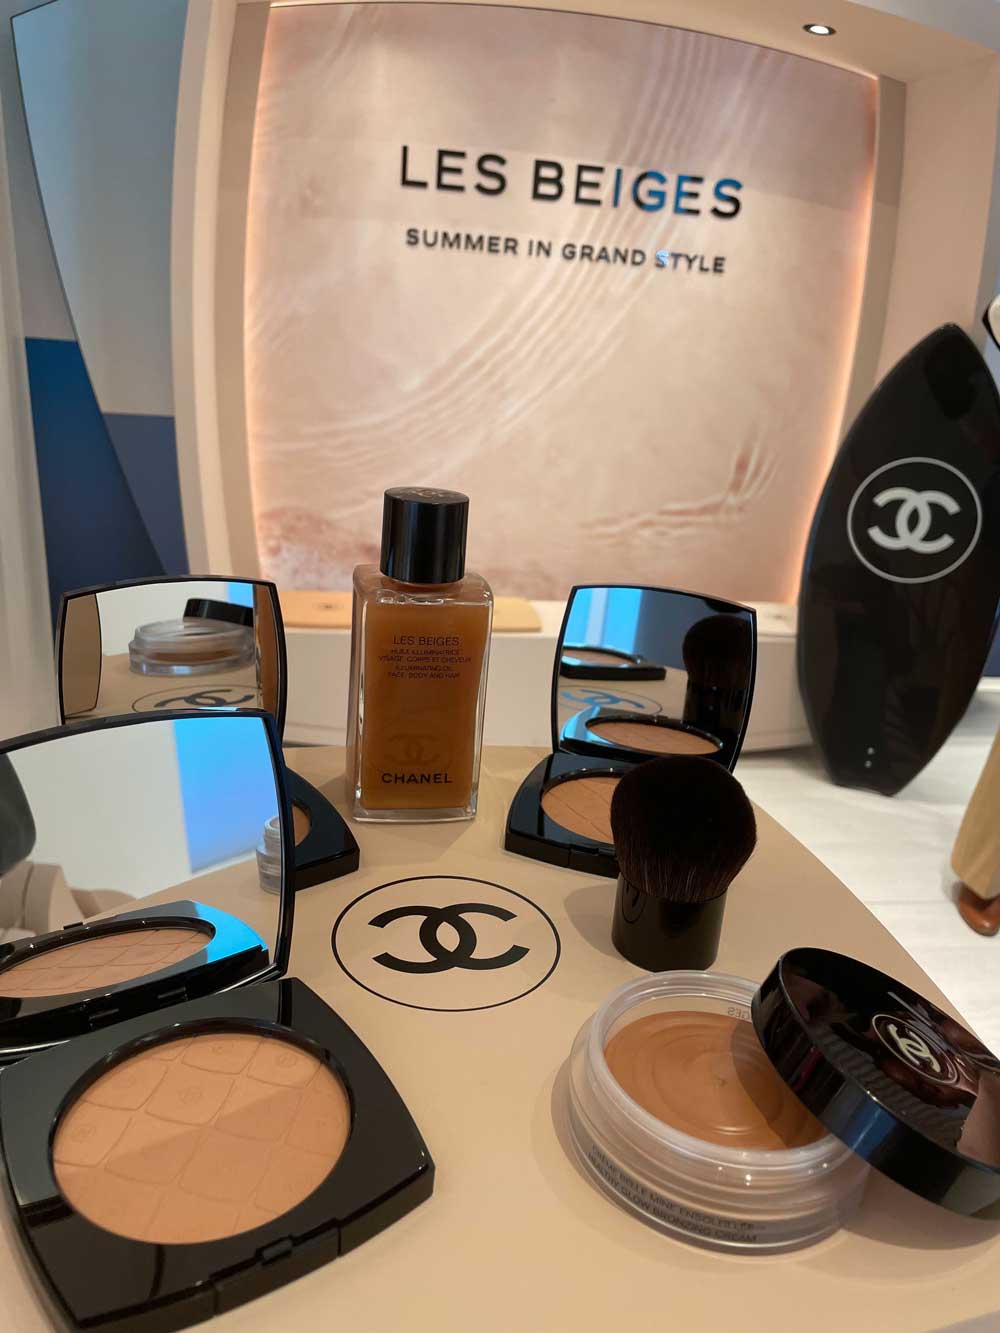 Go Big With Chanel's Les Beiges Grand Style Makeup Collection